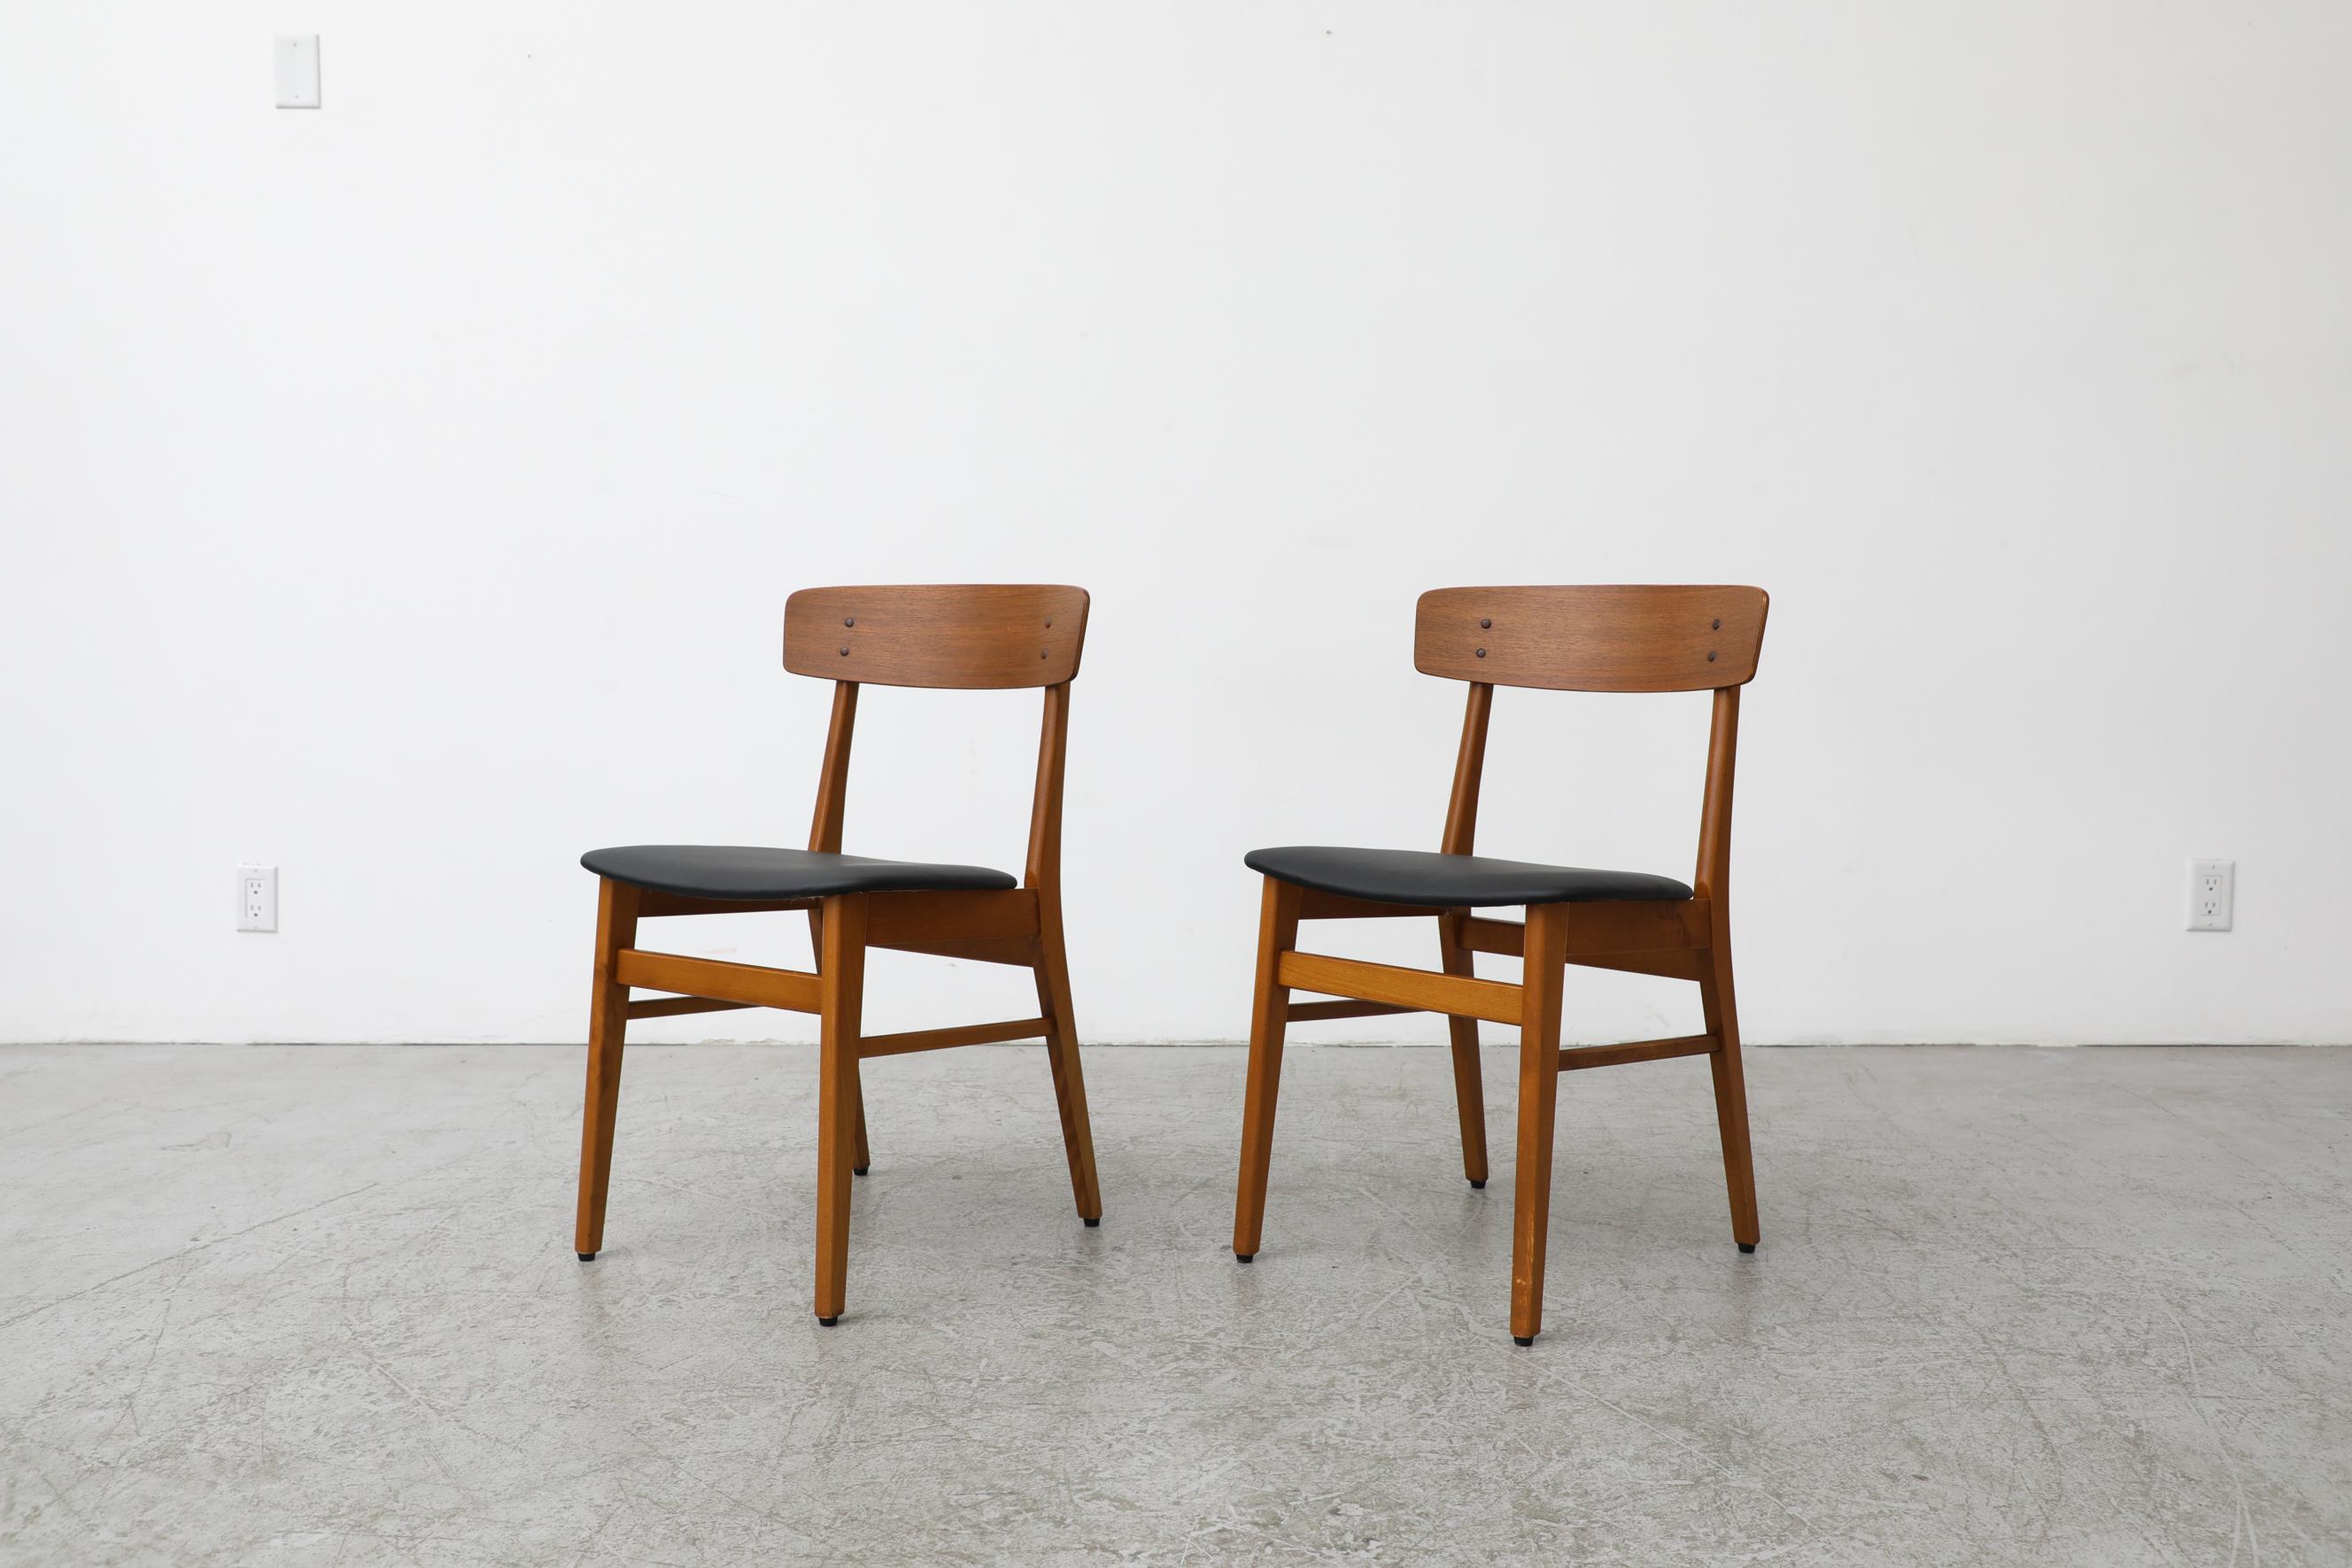 Pair of Borge Mogensen Style Danish Chairs by Farstrup with Black Skai Seats In Good Condition For Sale In Los Angeles, CA